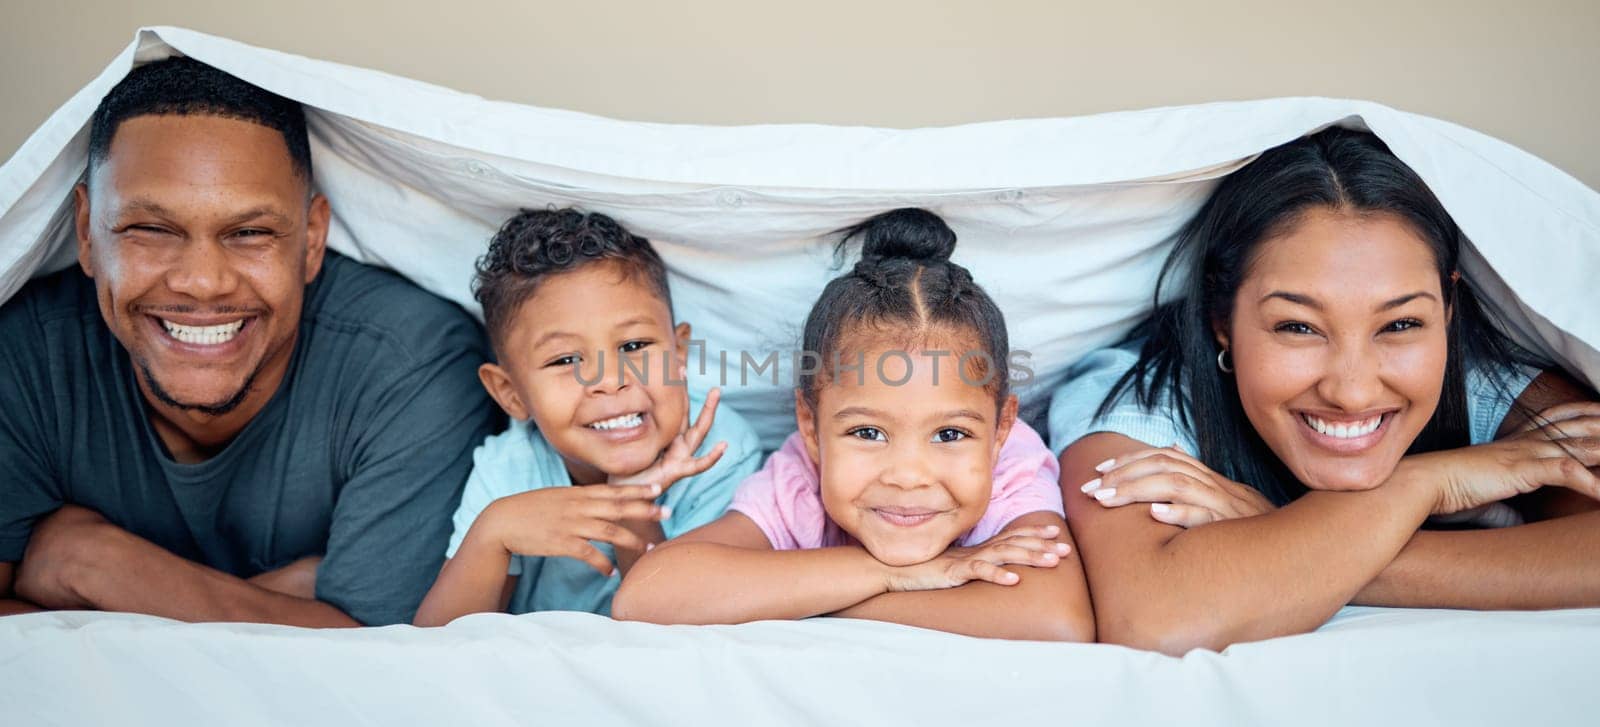 Love, blanket and happy family in bed together for quality time, care and support with smile. Relax, parents and children portrait for relationship bonding happiness lifestyle in family home bedroom by YuriArcurs